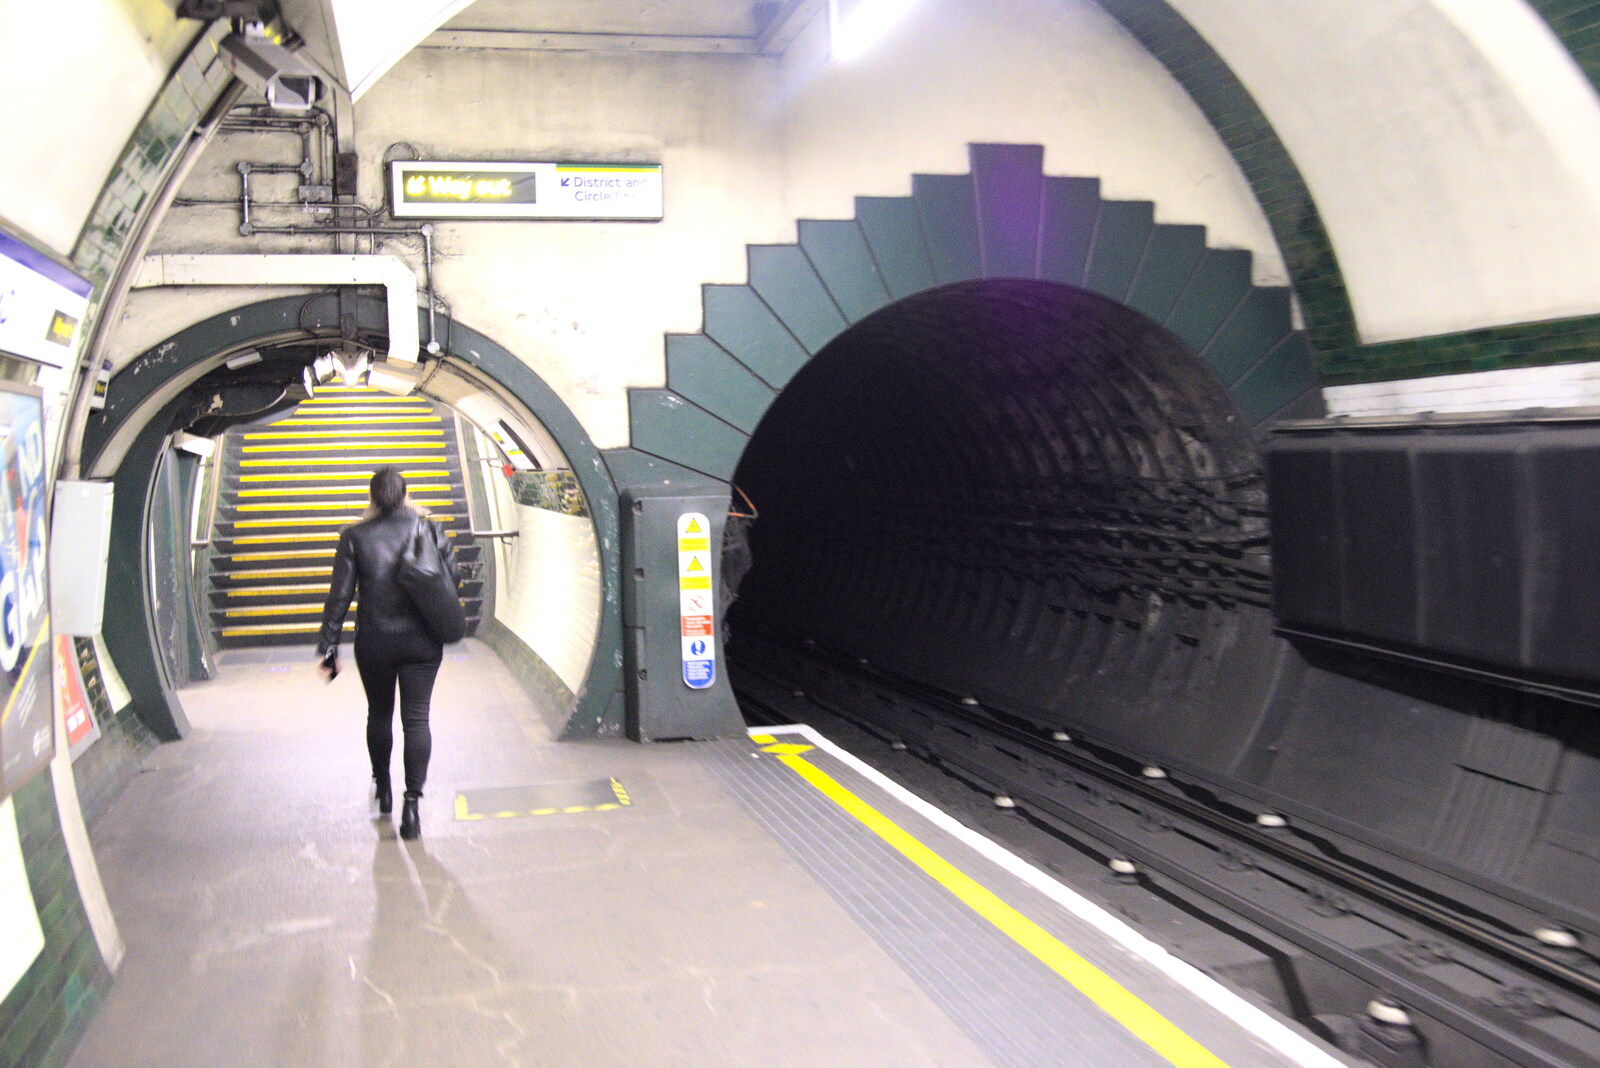 A particularly funky tunnel entrance from A Trip to the Natural History Museum, Kensington, London - 15th January 2022